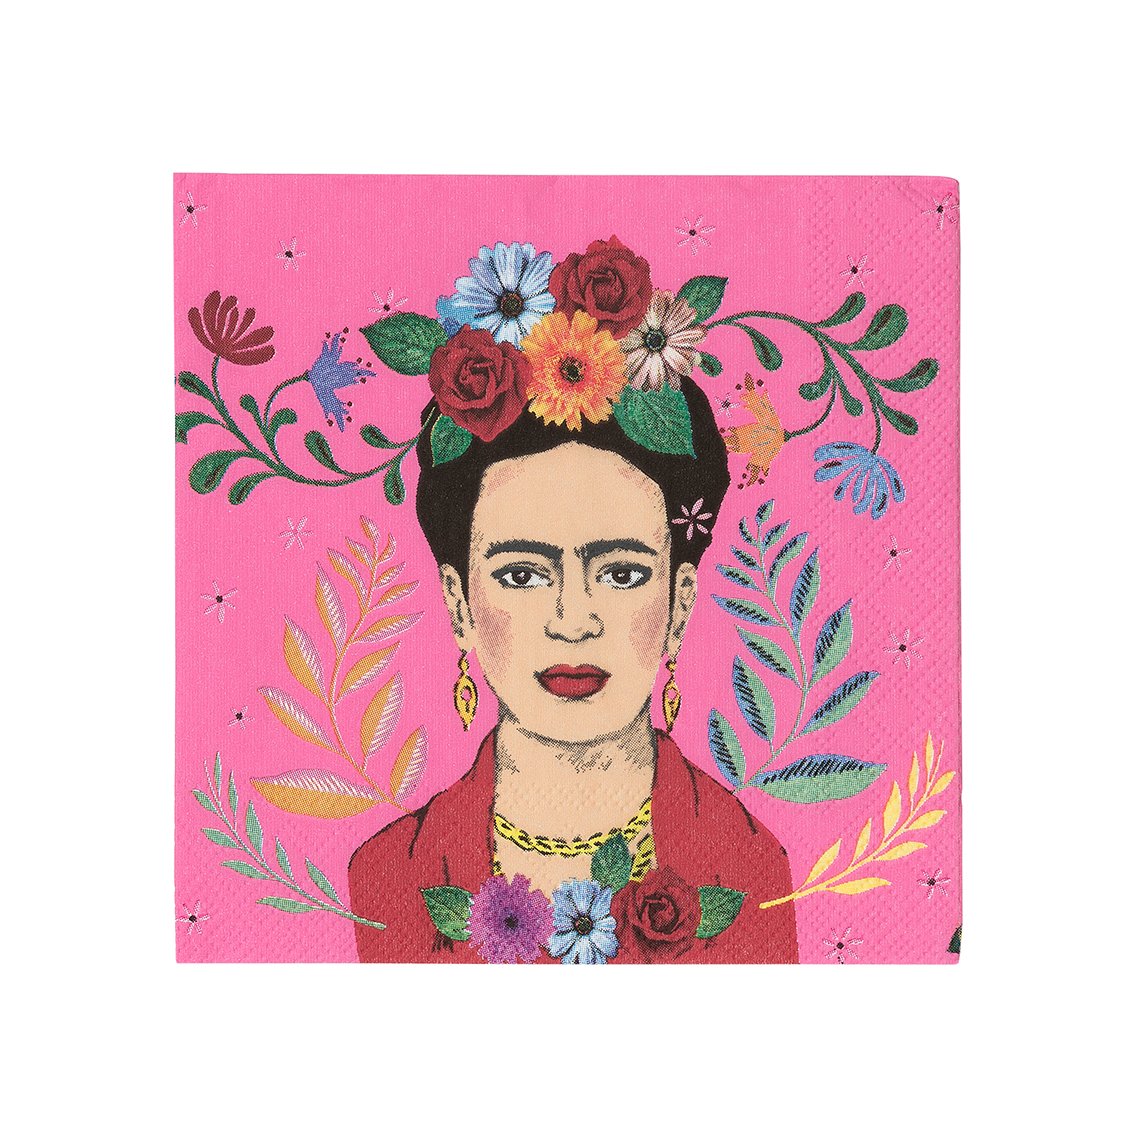 Frida Kahlo self portrait print square napkins in pink. Design features colorful flowers with vines. 